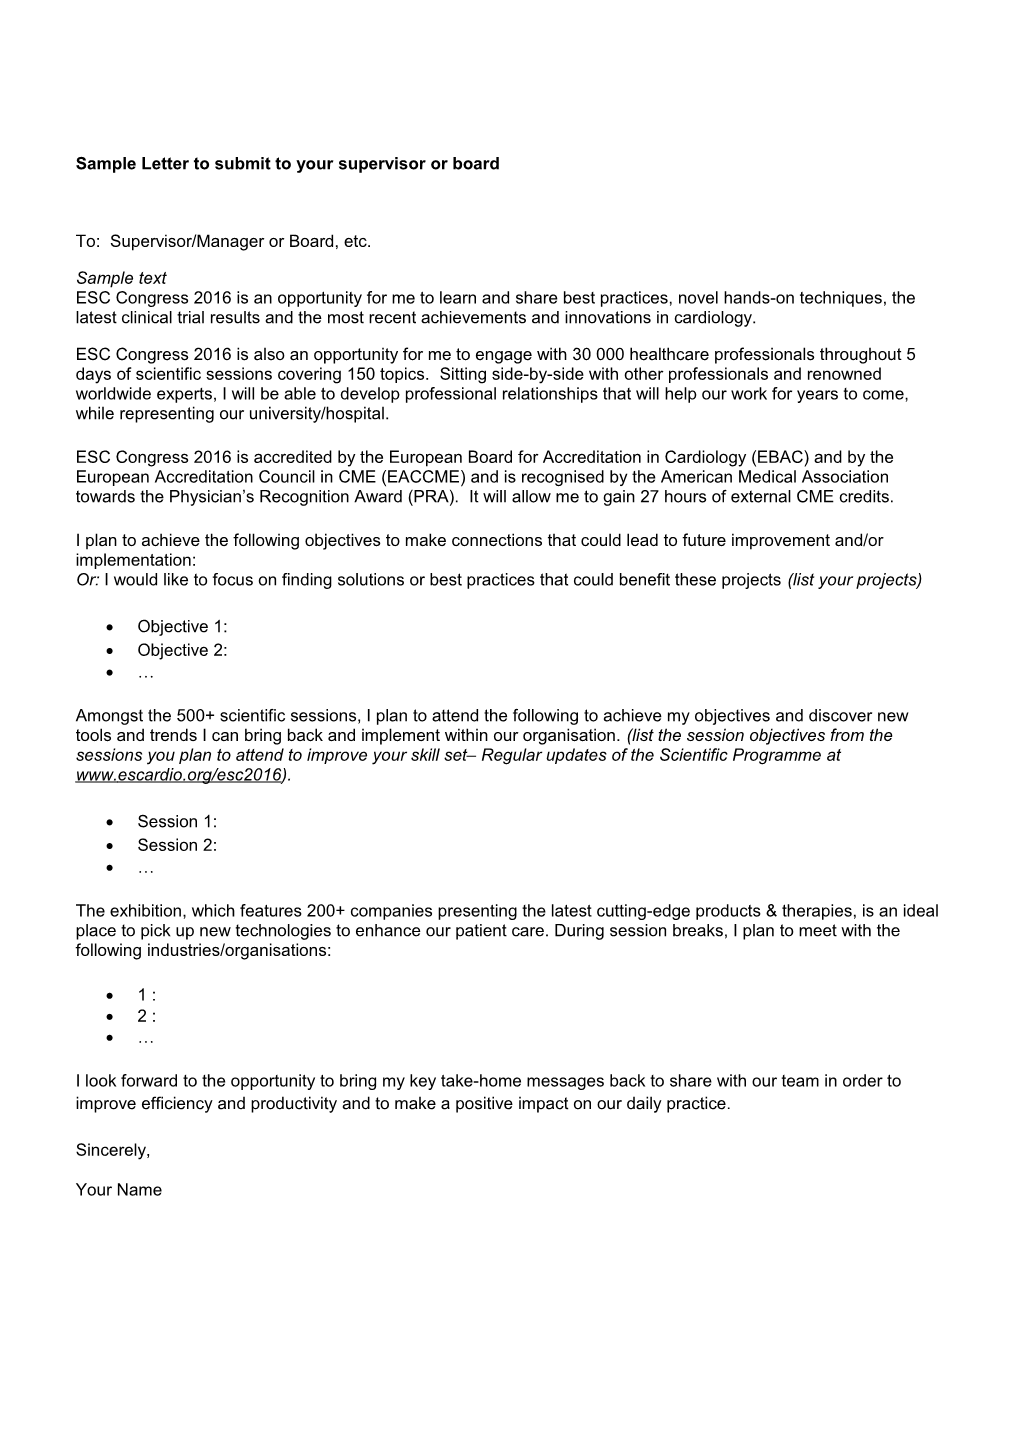 Sample-Letter How to Get the Support You Need